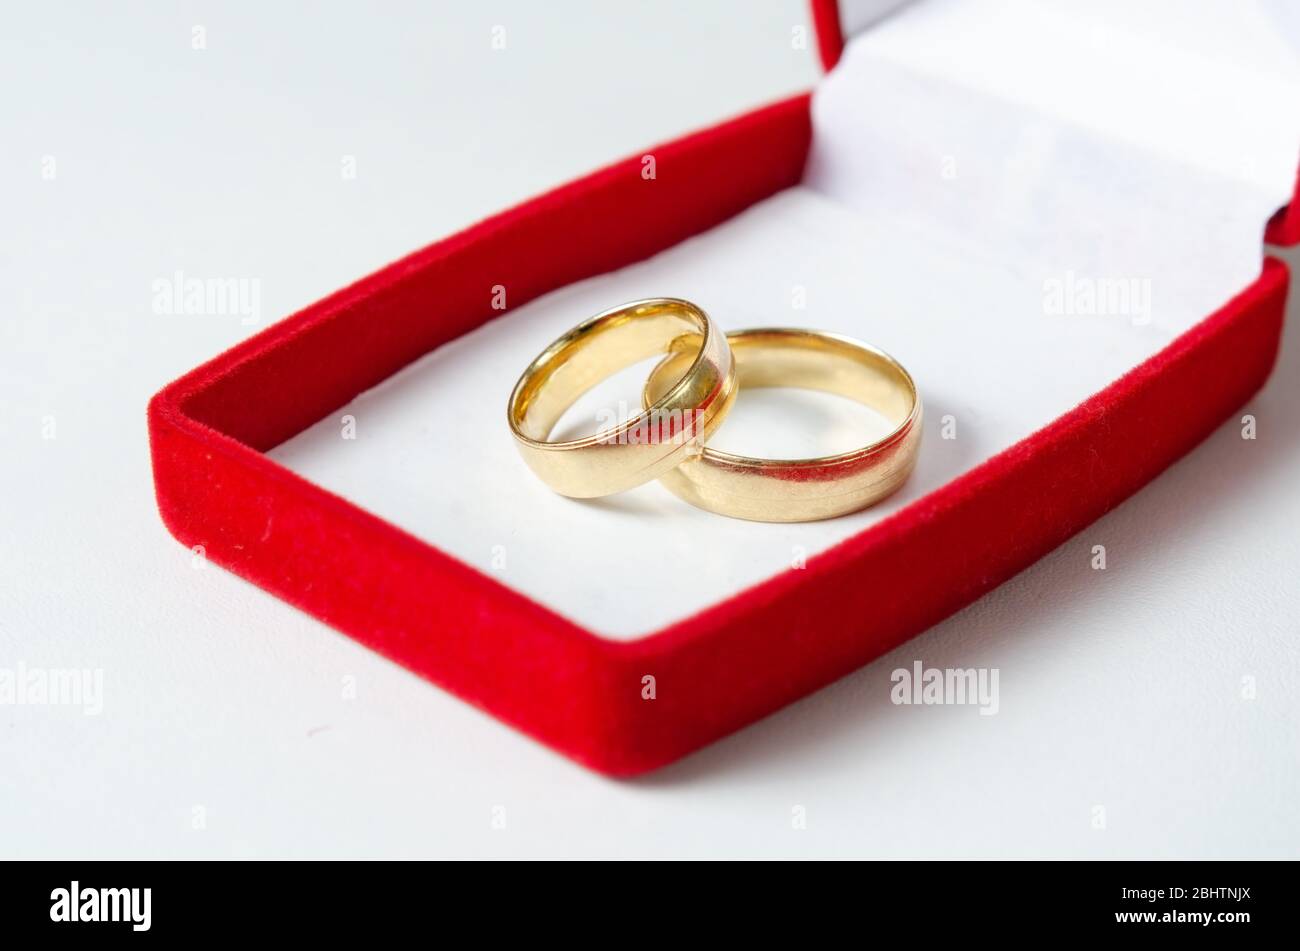 MZZJ Personalized Engraving Couple Matching Ring Brushed 2 Tone Black Rose  Gold Plated Tungsten Carbide Step Edge Wedding Rings for Him  Her,Anniversary Birthday Gift for Wife Husband | Amazon.com